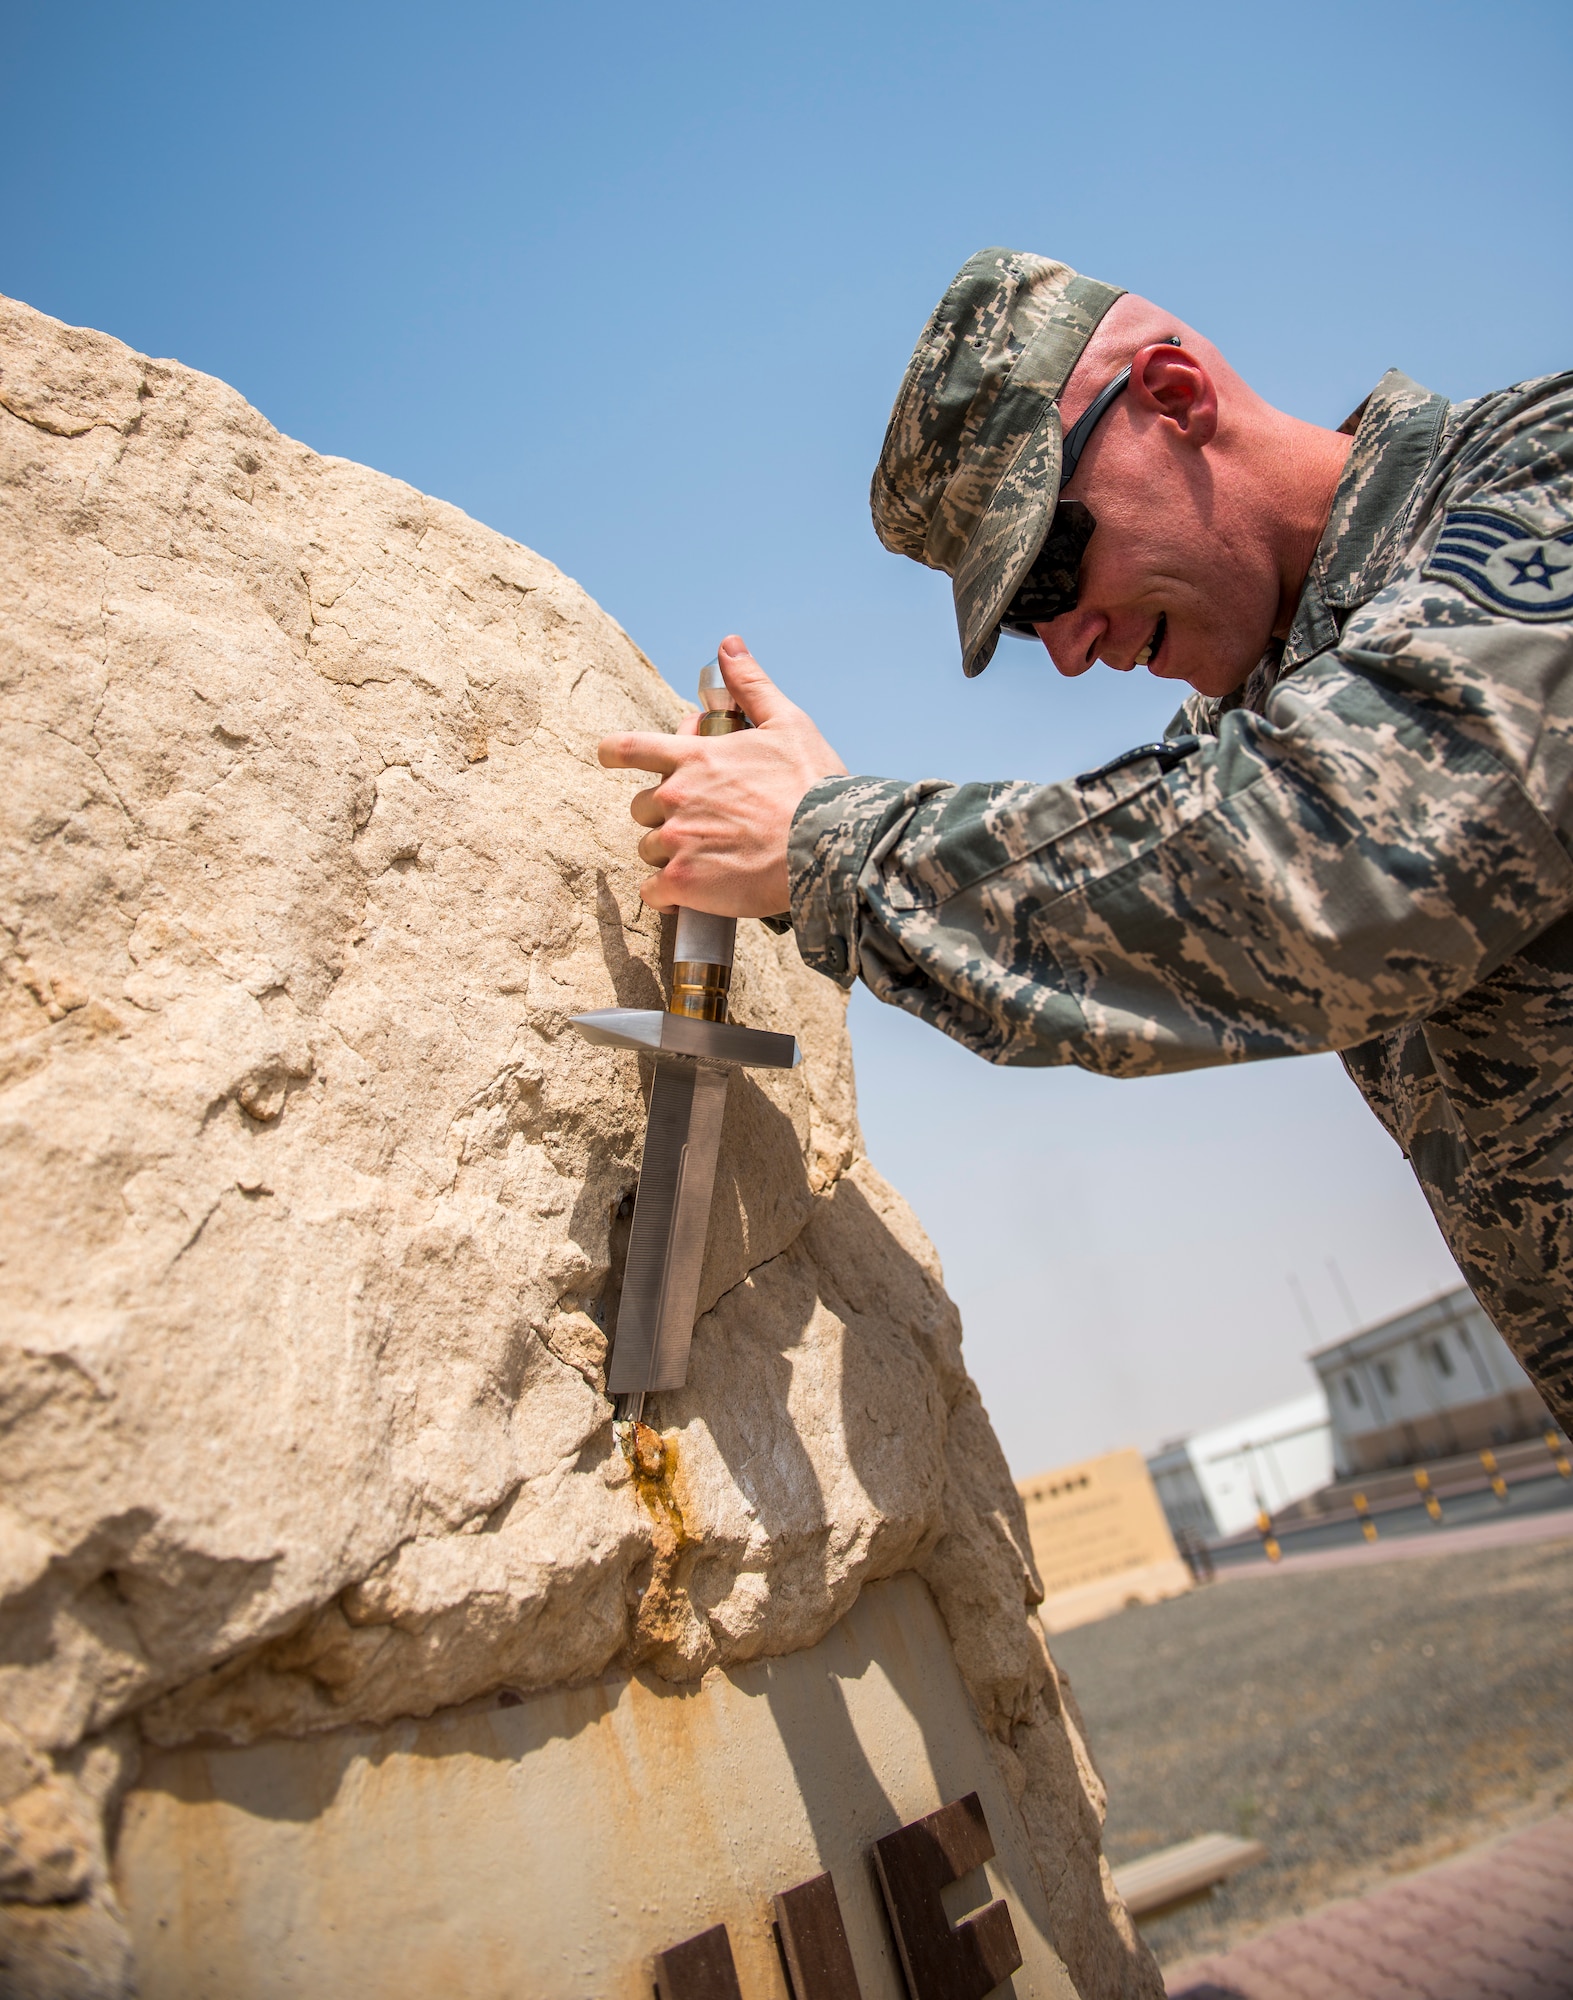 U.S. Air Force Staff Sgt. Justin Costanzo, 386th Expeditionary Maintenance Squadron aircraft maintenance technician, places the sword he helped craft inside The Rock Aug. 19, 2014 at an undisclosed location in Southwest Asia. Costanzo, along with Staff Sgt. Jarrod McMillian, spent over 140 man-hours designing and building the sword. Costanzo deployed from Shaw Air Force Base, S.C. in support of Operation Enduring Freedom. (U.S. Air Force photo by Staff Sgt. Jeremy Bowcock)